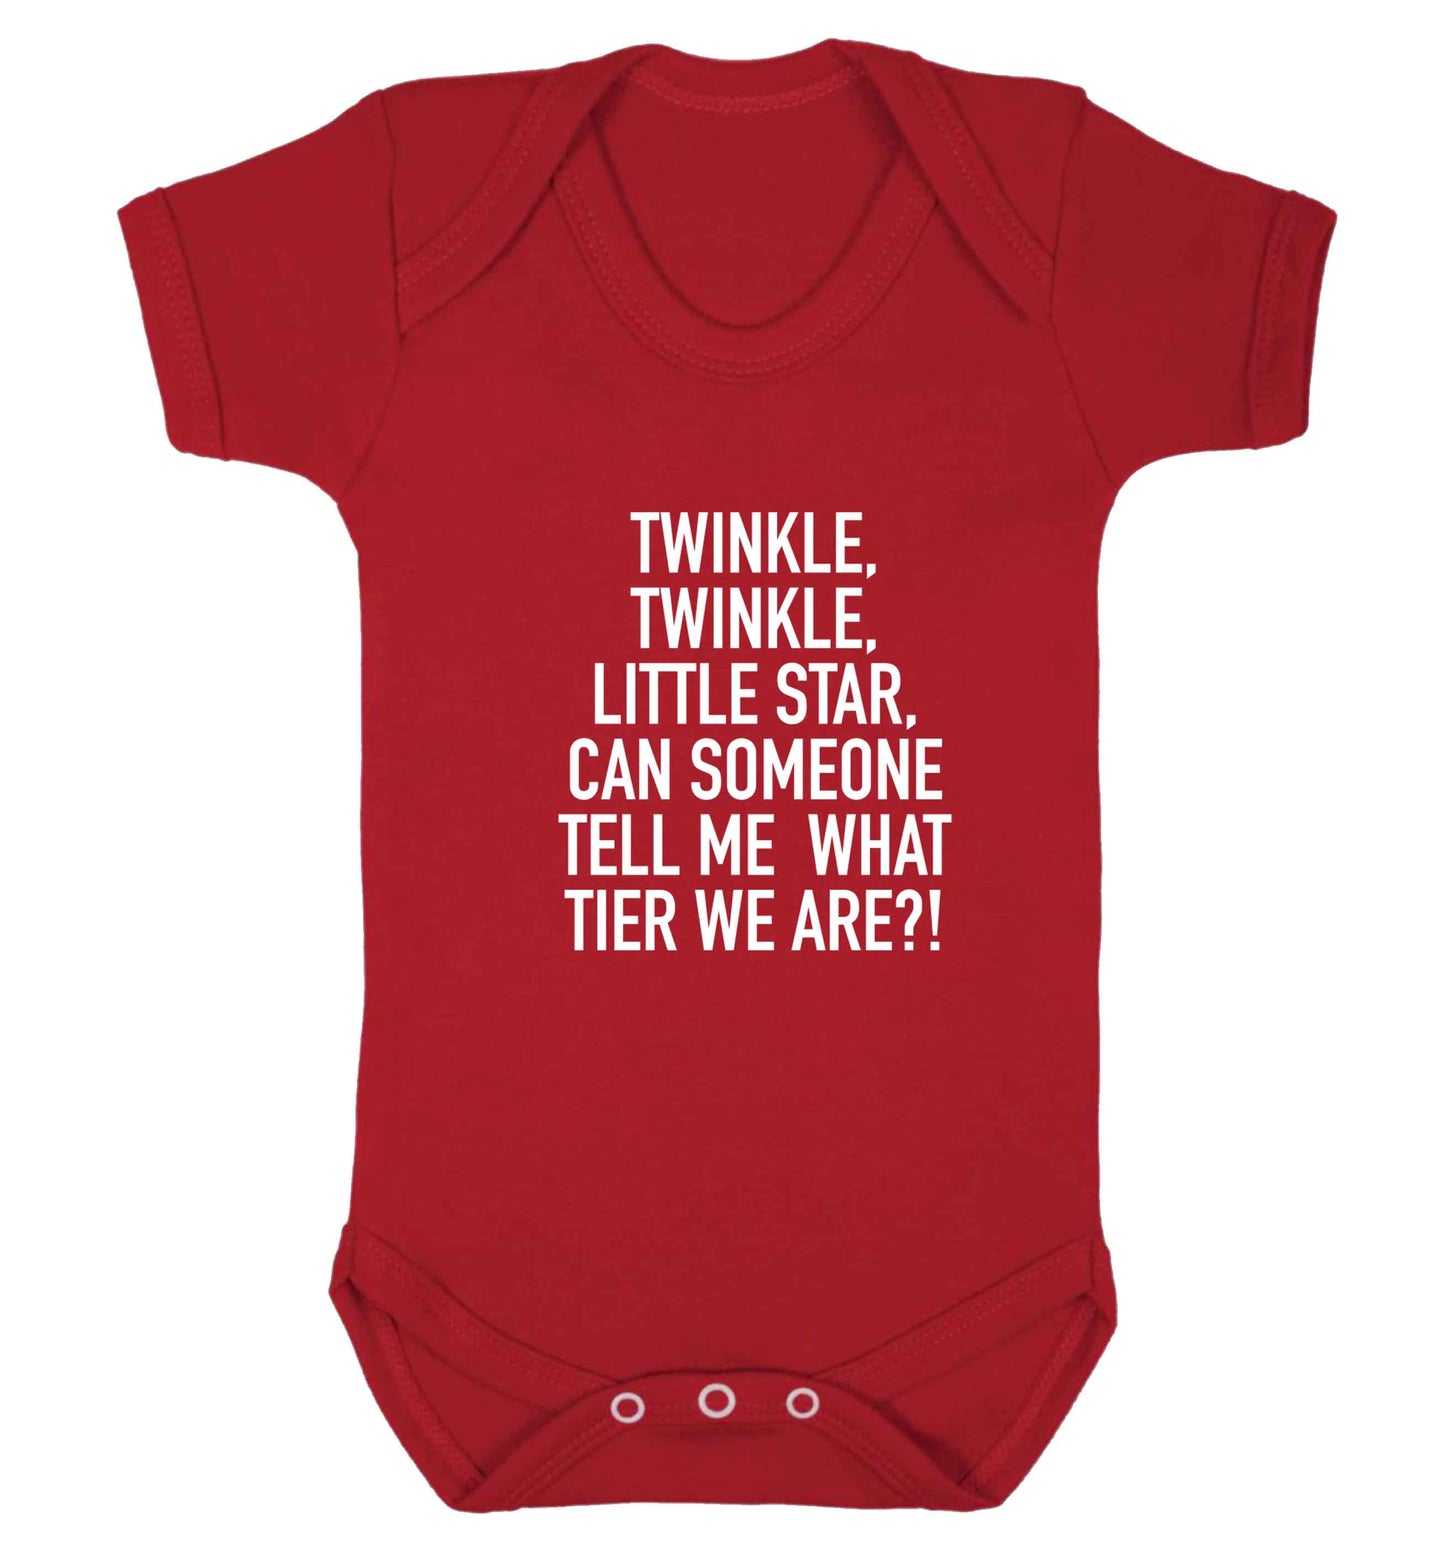 Twinkle twinkle, little star does anyone know what tier we are? baby vest red 18-24 months